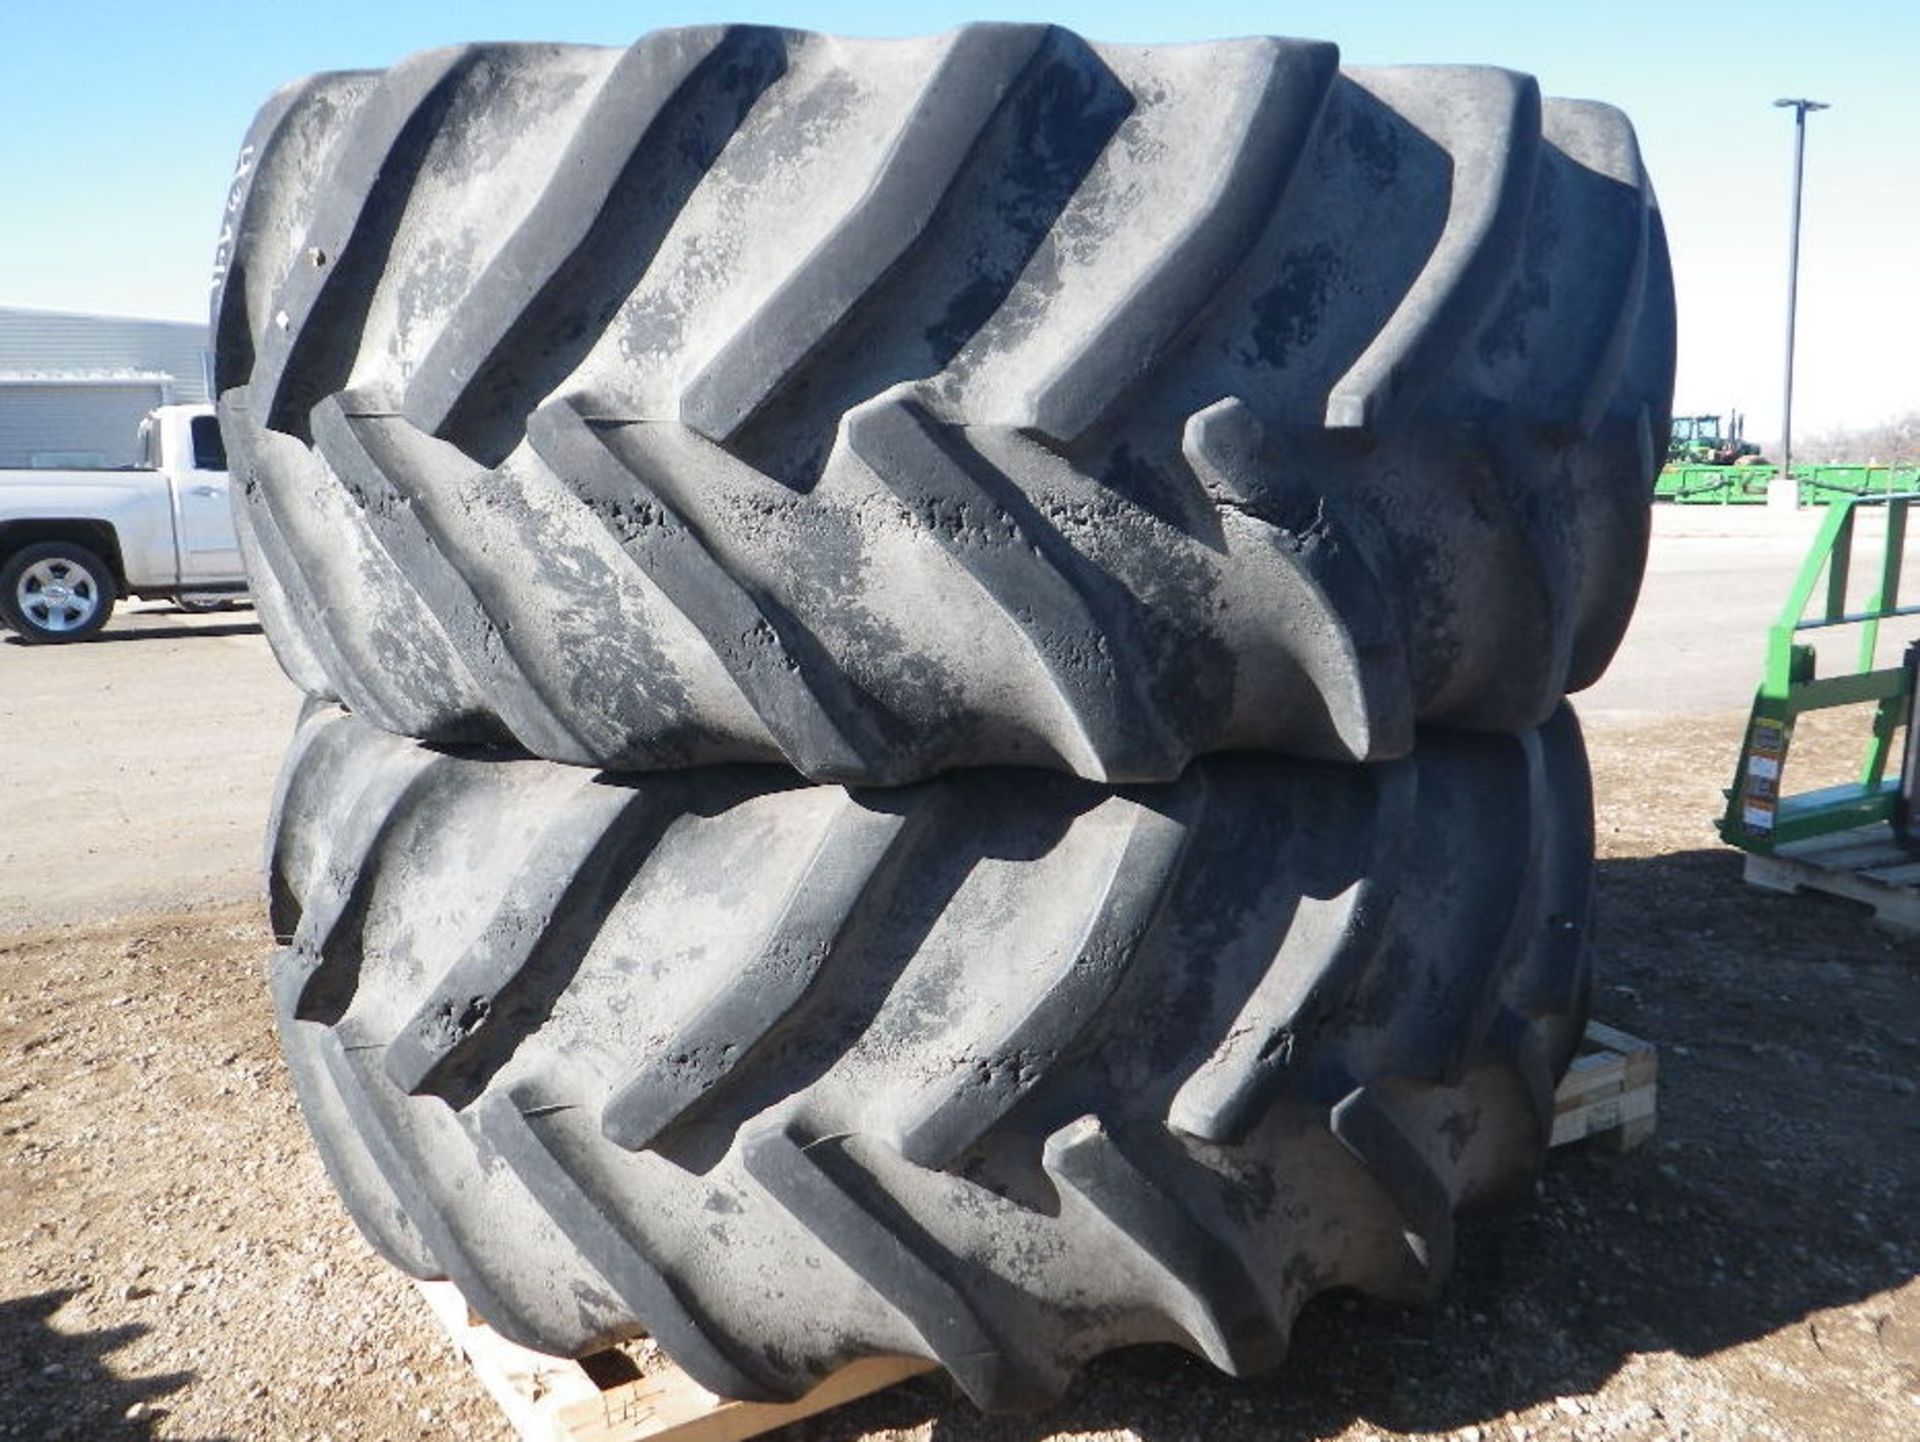 (30) 1 PAIR GY 800/70R38 SUPER TRACTION RADIAL COMBINE TIRES W/STUBBLE DAMAGE - TIRES ONLY - Image 4 of 4